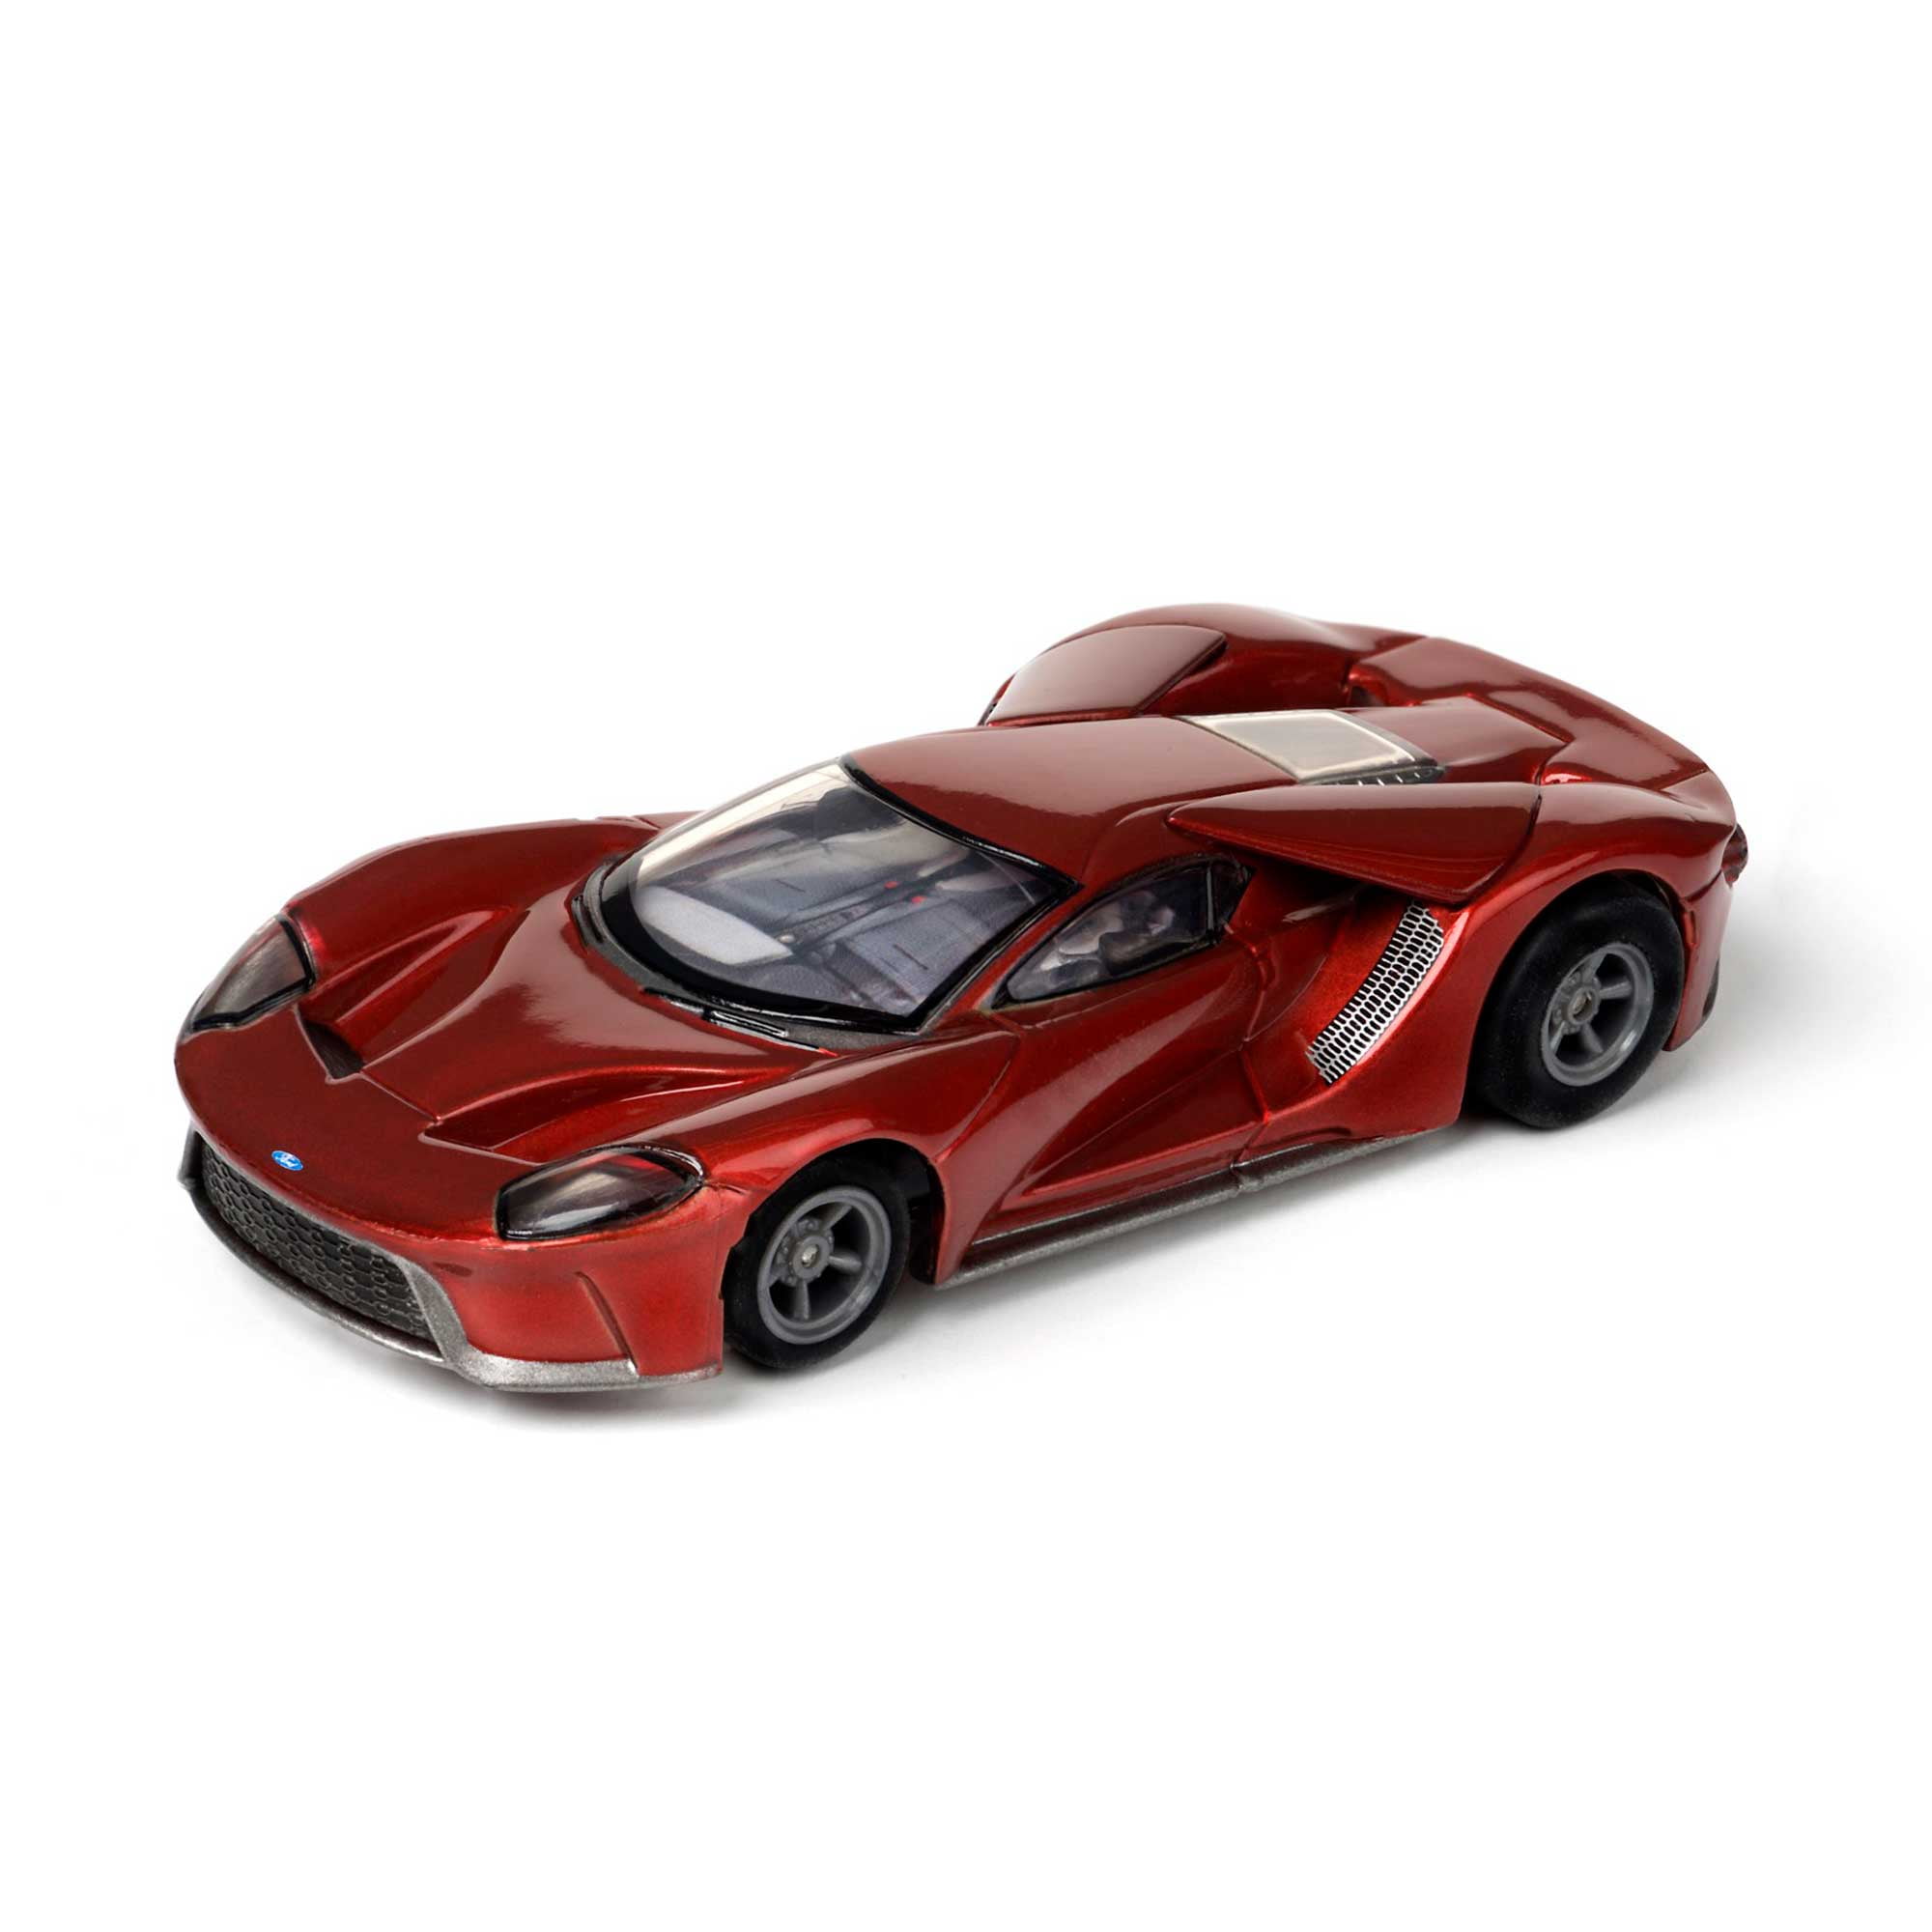 AFX/Racemasters Ford GT - Liquid Red (MG+) Slot Car, AFX22030